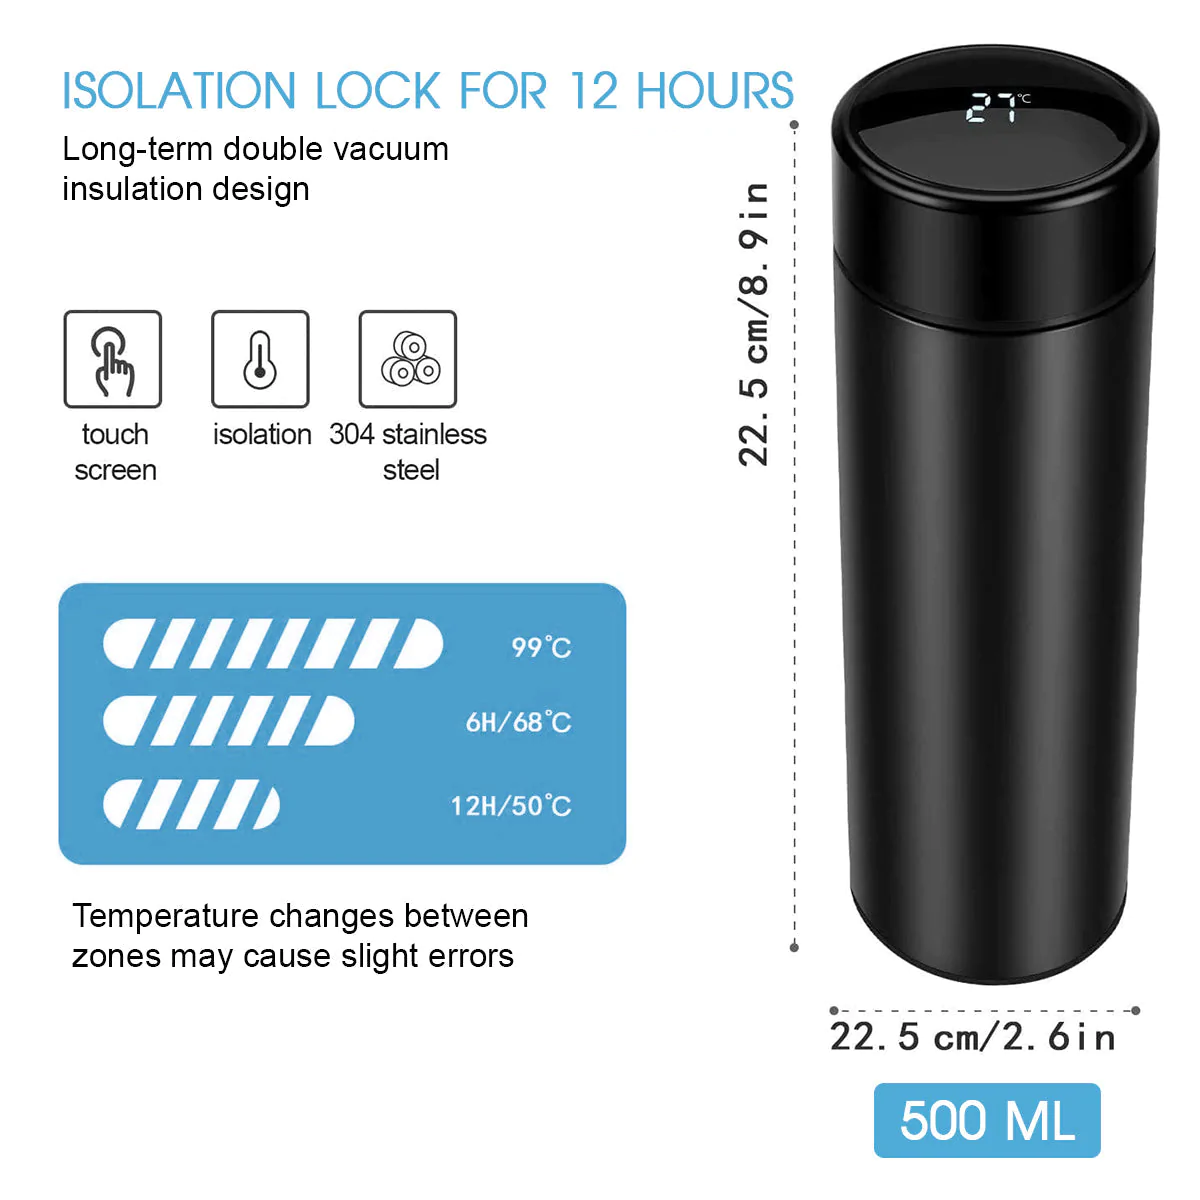 Custom Text and Logo 17oz Insulated Water Bottle with LED Temperature Display, Compatible with Daewoo, Coffee Tea Infuser Bottle Double Wall Vacuum Insulated Water Bottle for Hot or Cold Drink